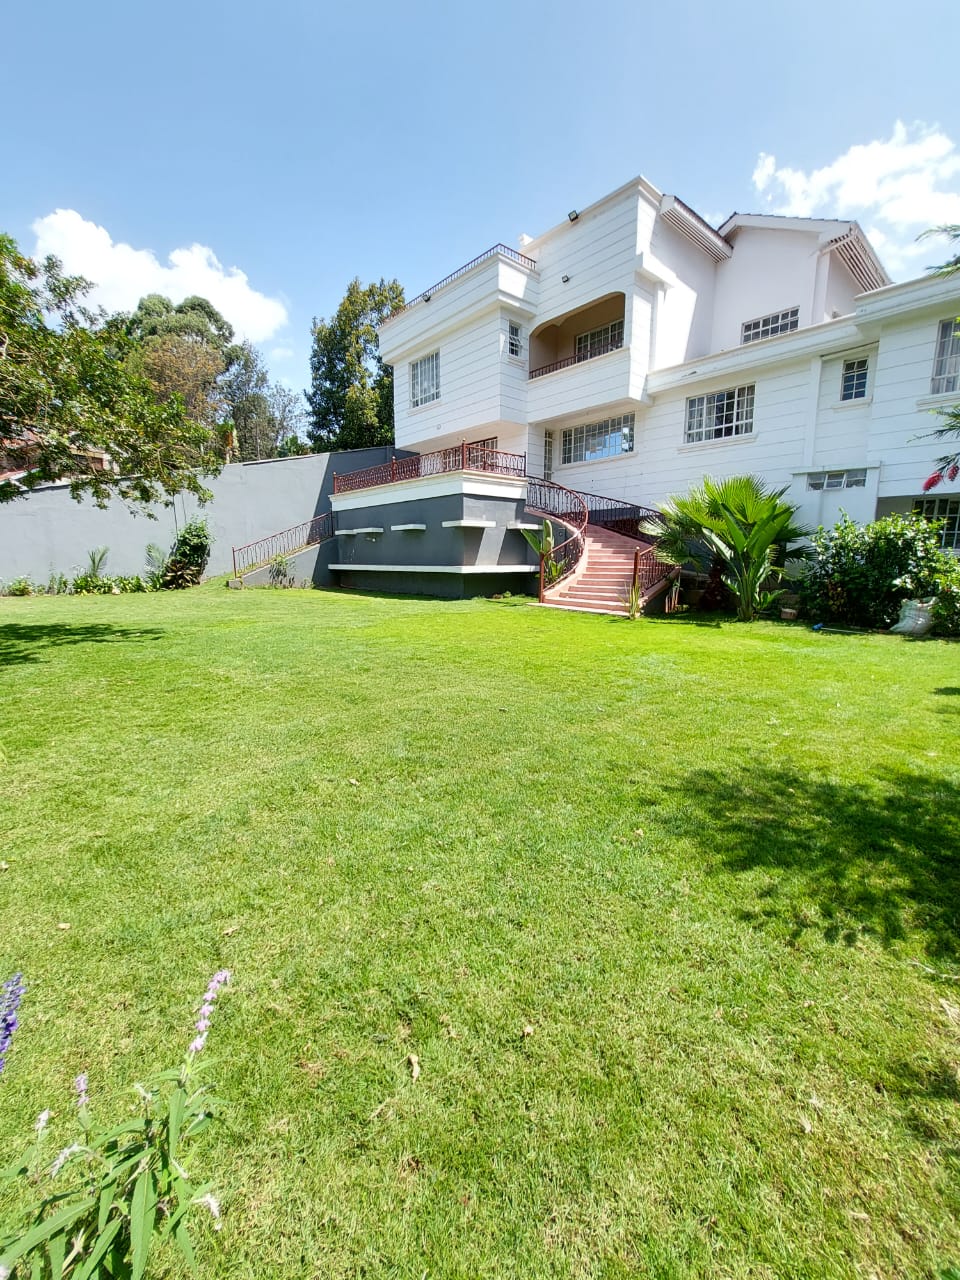 Spacious 6 Bedroom House for Sale in Kitisuru, Nairobi. The house sits on 1/2 Acre Land with clean Title Deed. Selling at Kshs. 150 Million Musilli Homes Pam Golding